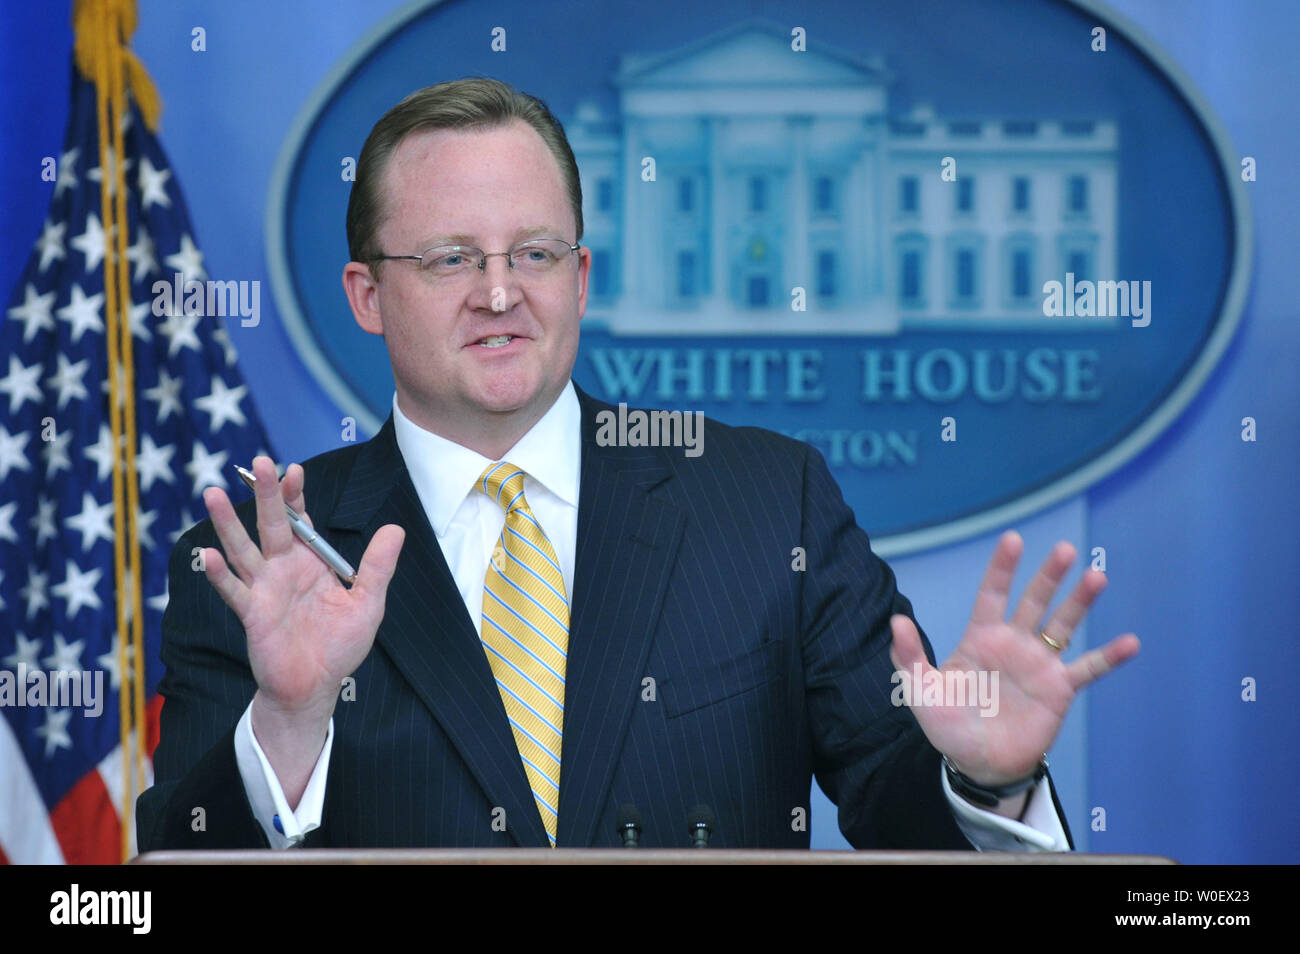 White House Press Secretary Robert Gibbs speaks about the swine influenza during his daily press briefing at the White House in Washington on April 27, 2009. (UPI Photo/Kevin Dietsch) Stock Photo